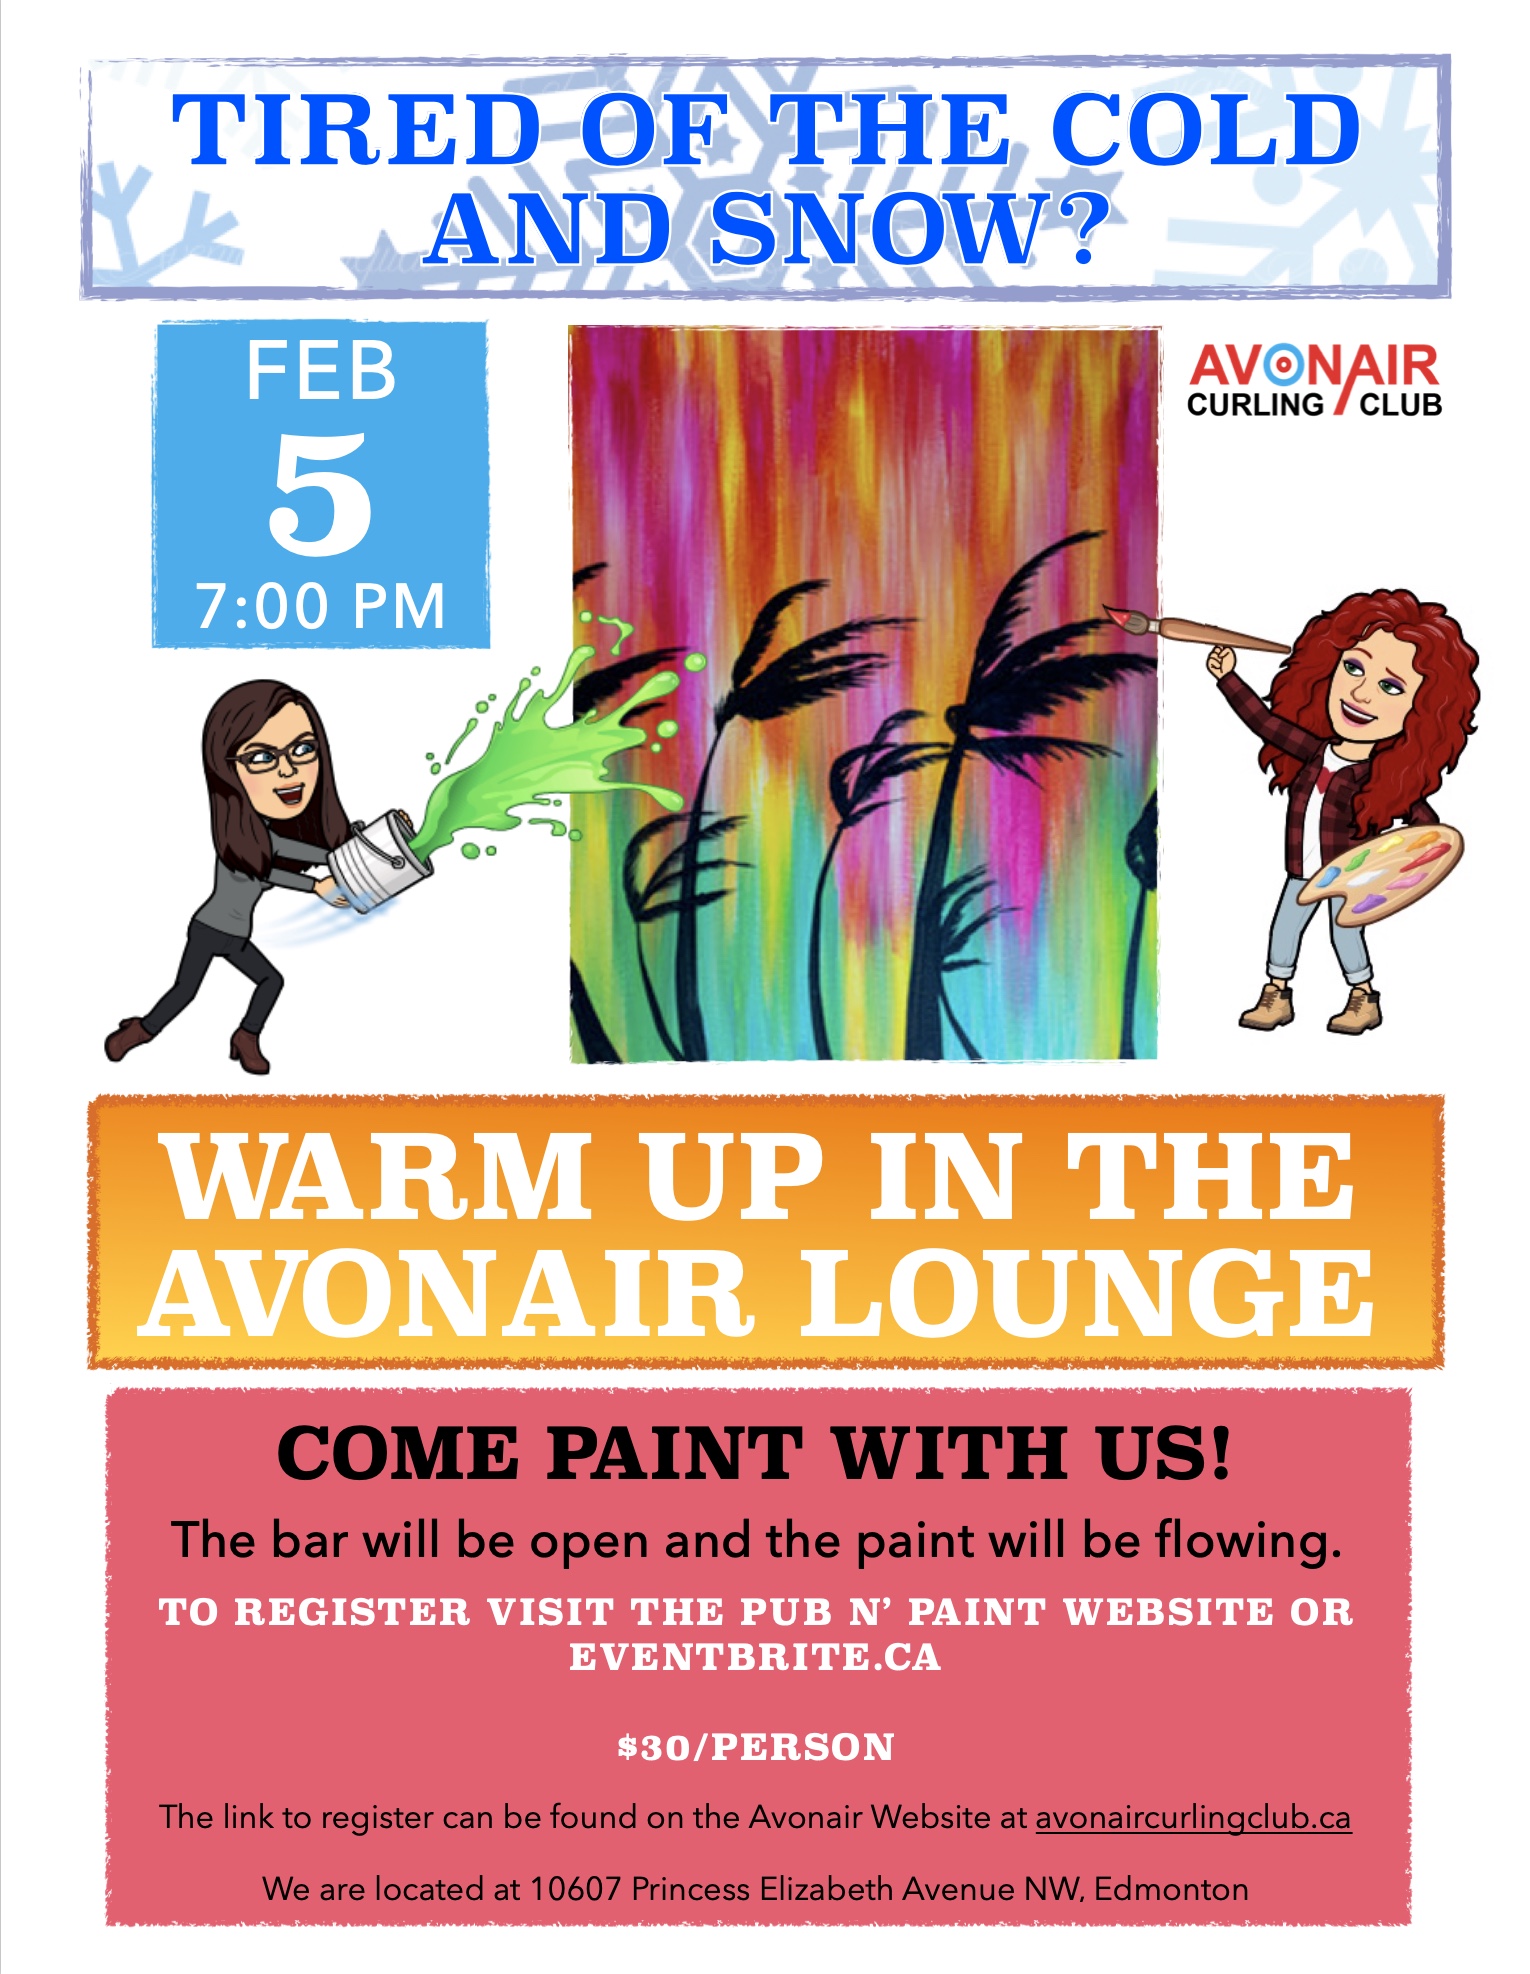 Paint Night Poster